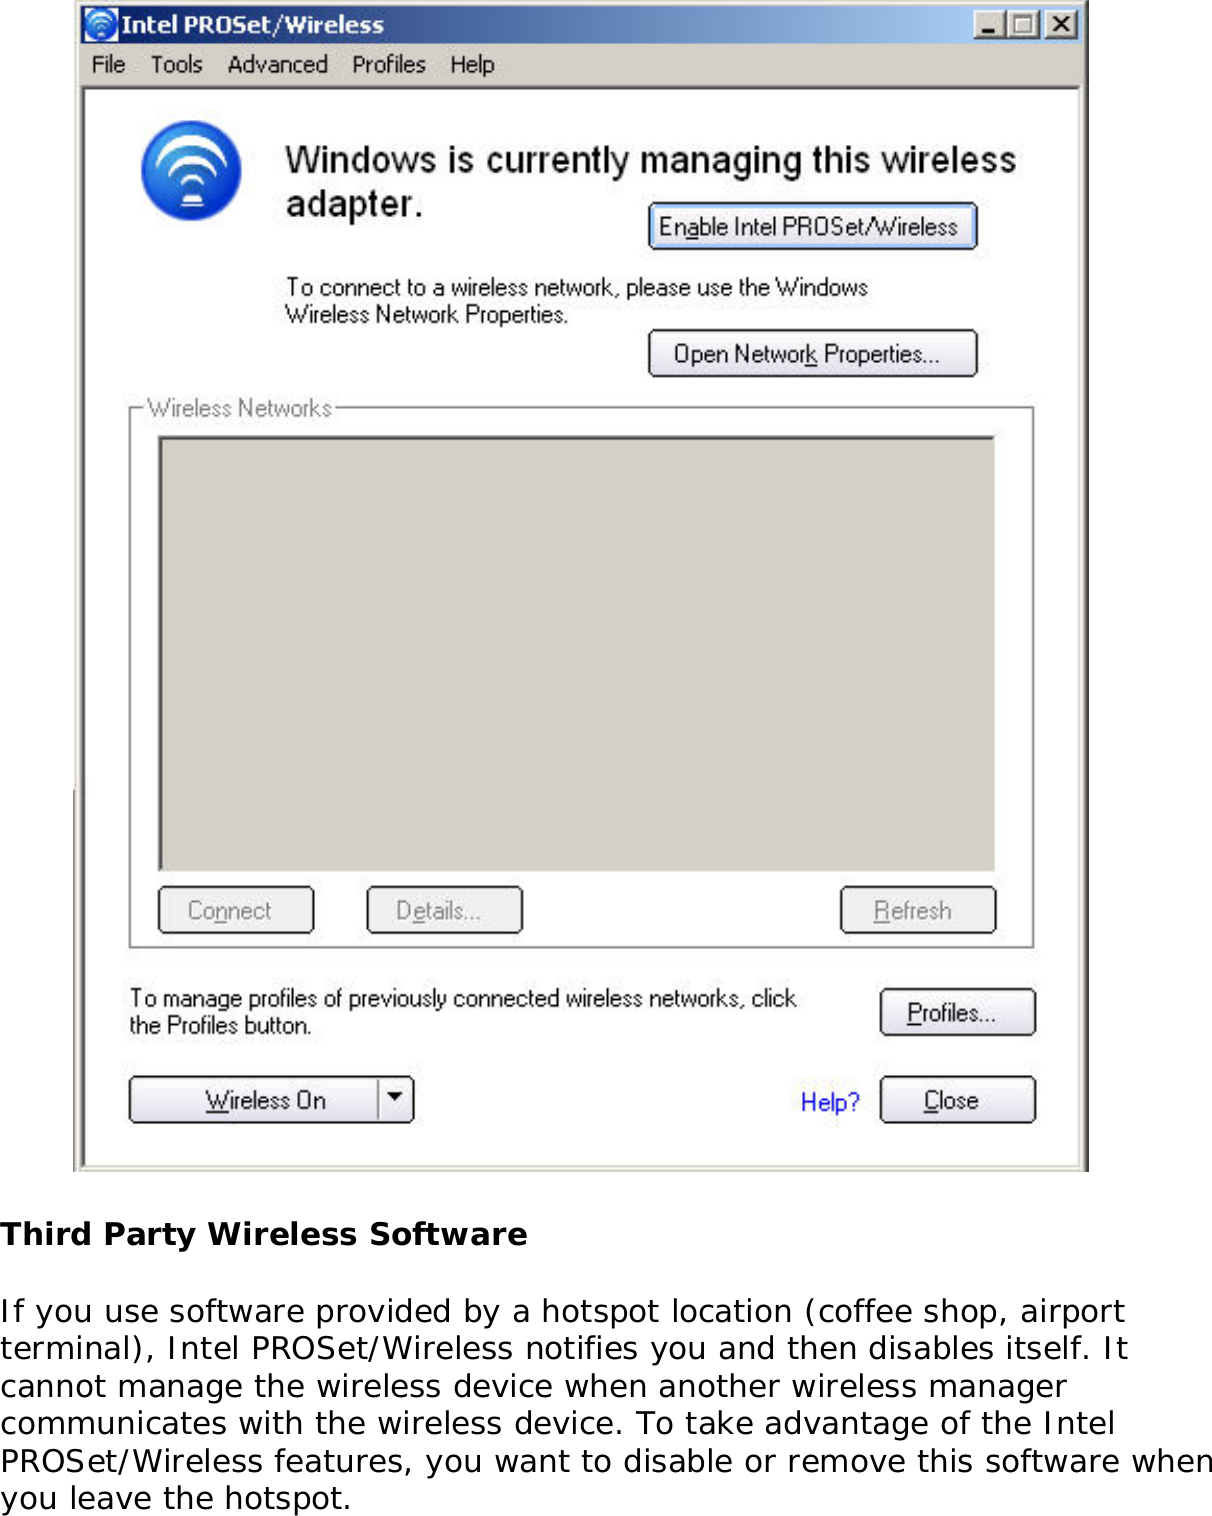  Third Party Wireless SoftwareIf you use software provided by a hotspot location (coffee shop, airport terminal), Intel PROSet/Wireless notifies you and then disables itself. It cannot manage the wireless device when another wireless manager communicates with the wireless device. To take advantage of the Intel PROSet/Wireless features, you want to disable or remove this software when you leave the hotspot. 